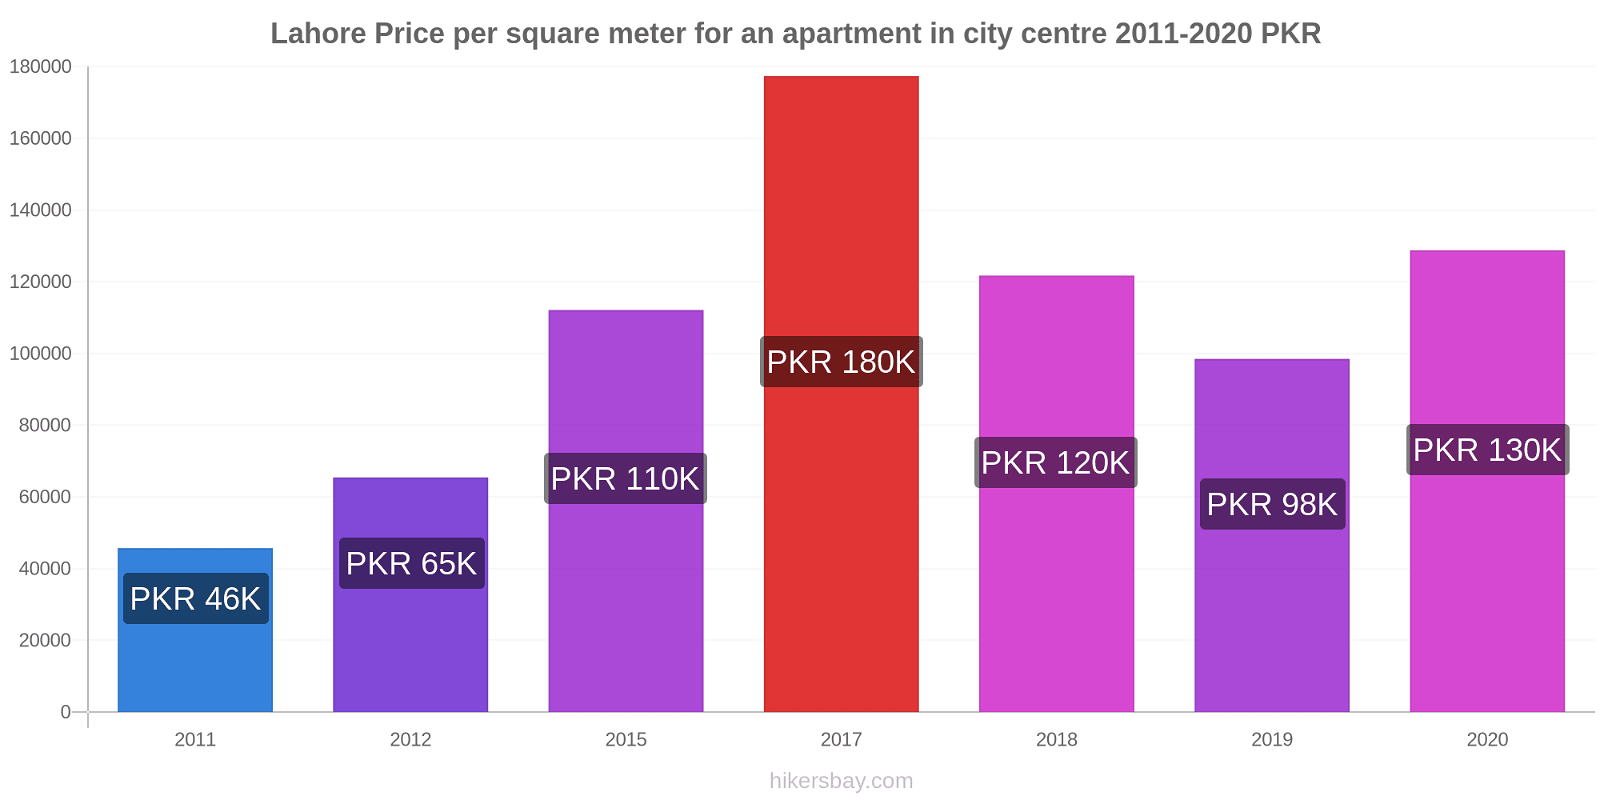 Lahore price changes Price per square meter for an apartment in city centre hikersbay.com